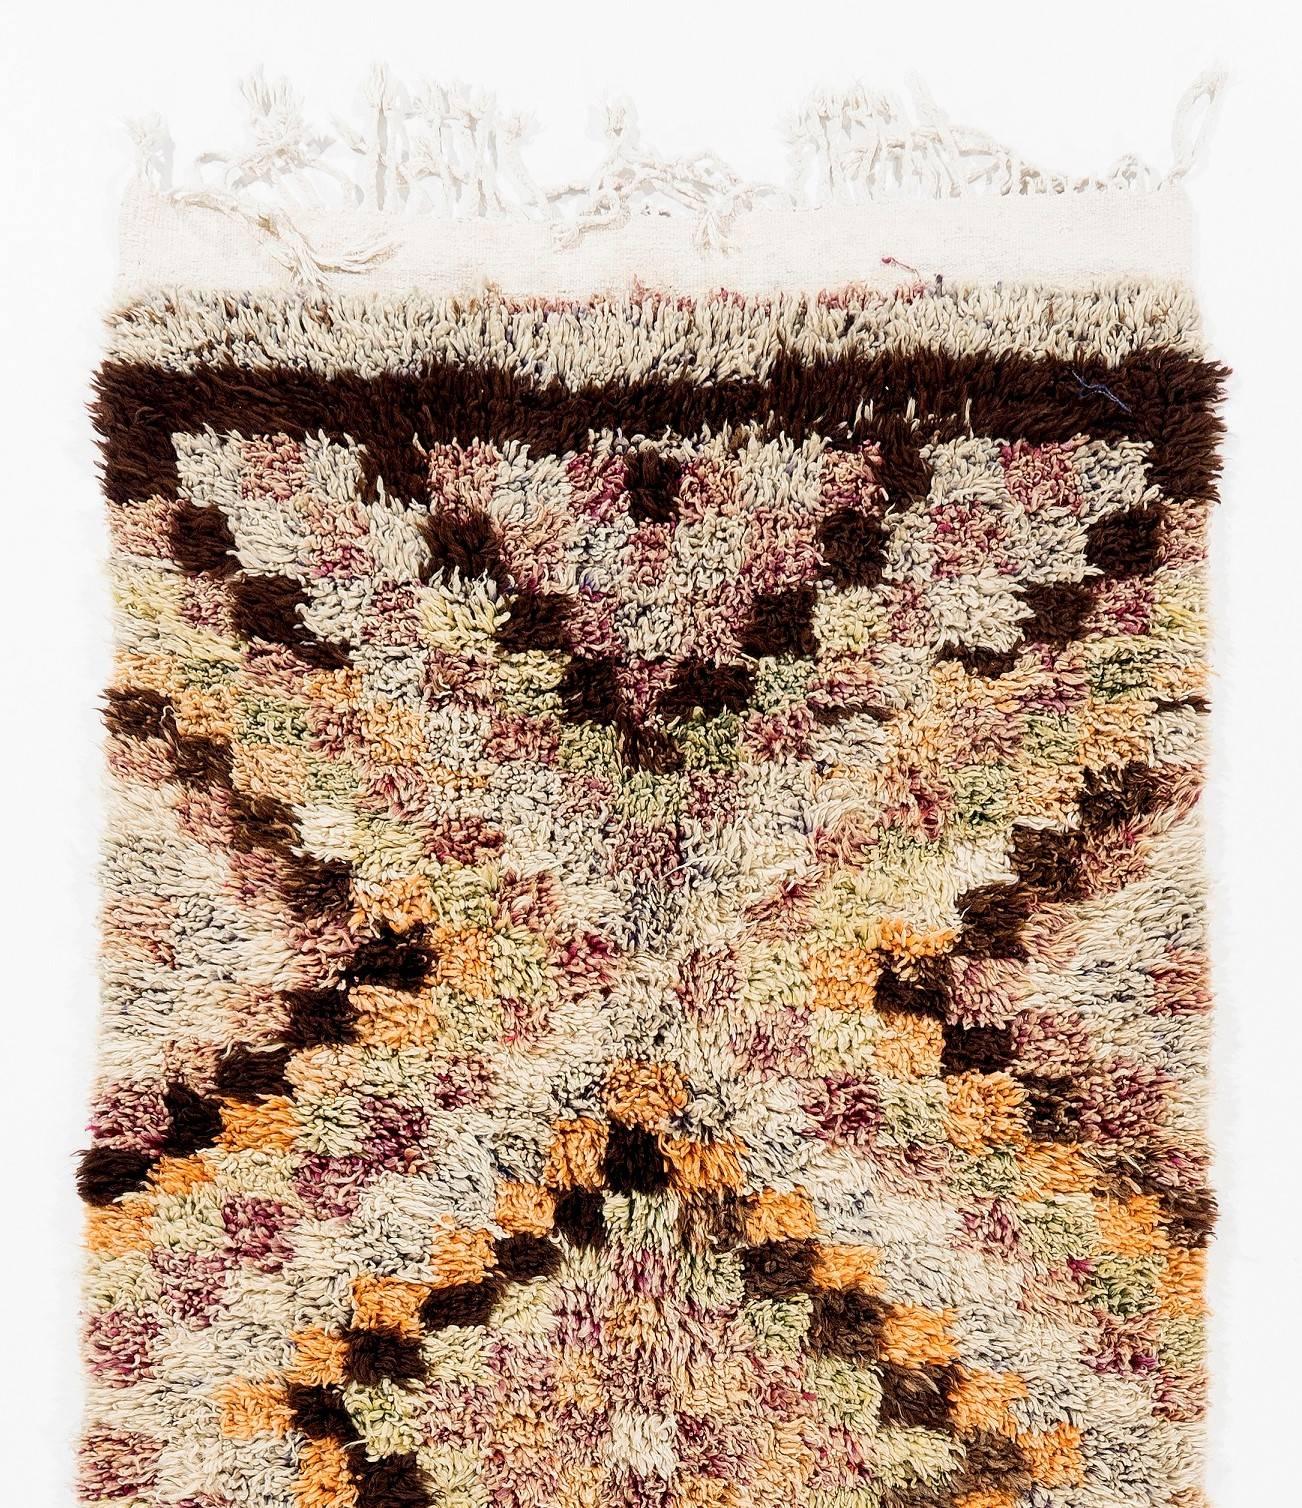 A handmade mid-century 'Tulu' (Turkish word for 'thick piled') runner rug from Konya in Central Turkey. The rug is made of 100% wool, therefore it is very soft and comfortable. 

These simple rugs with geometric modern designs and lustrous wool